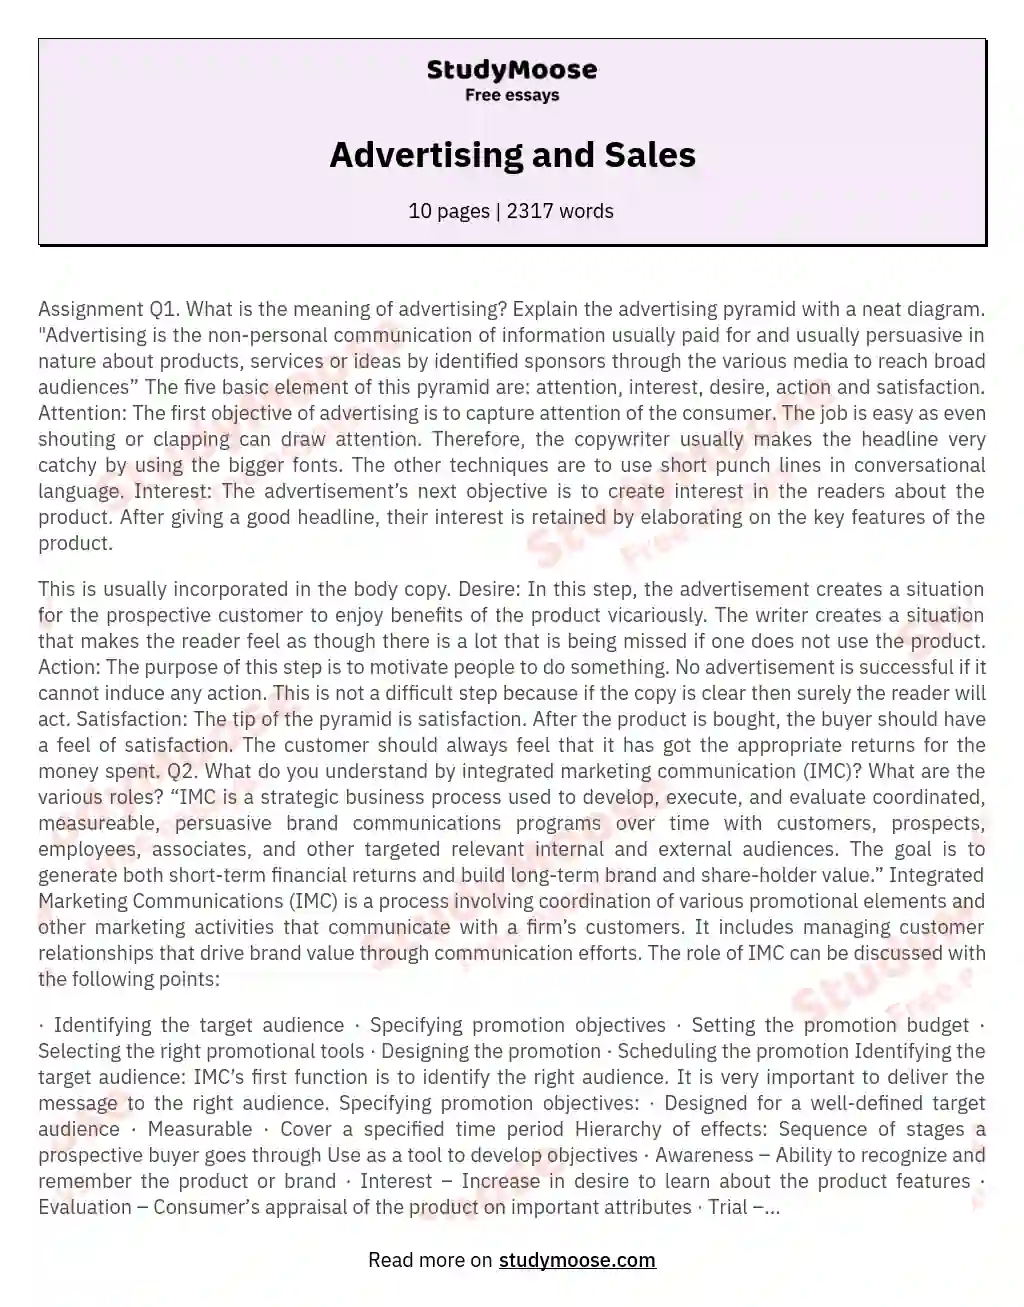 Advertising and Sales essay